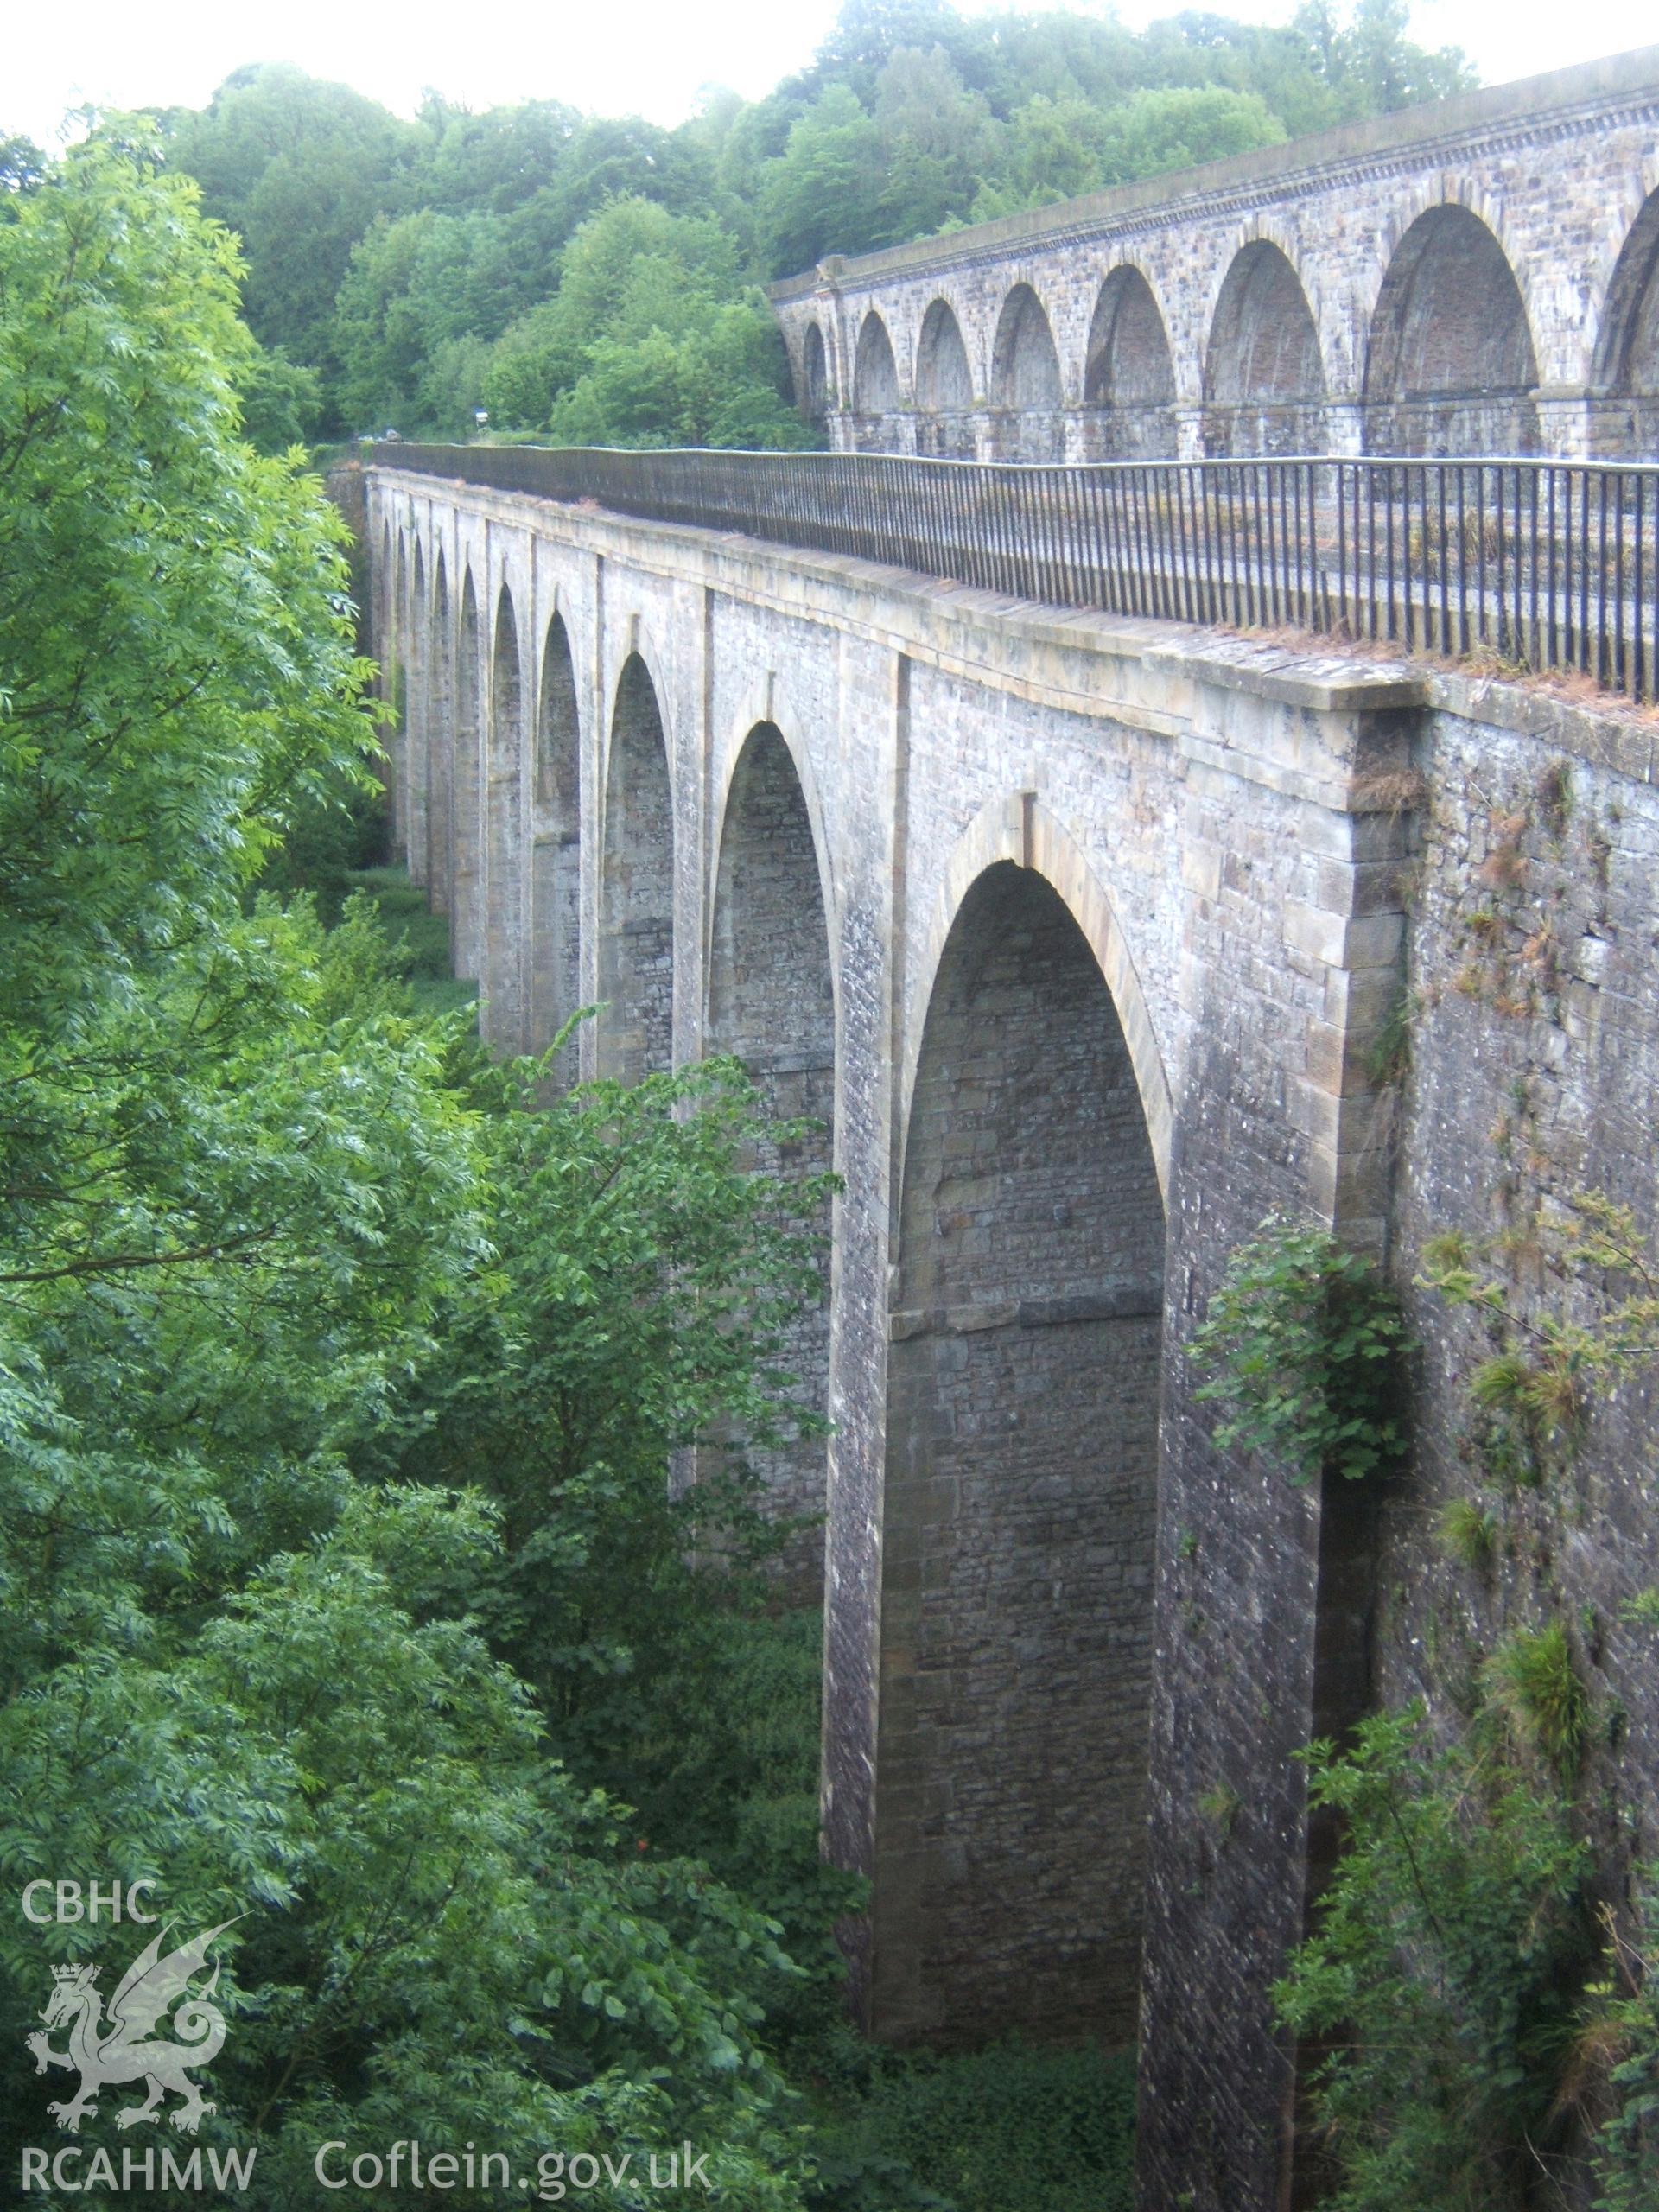 North-east eleveations of Chirk Aqueduct and Viaduct from the north.